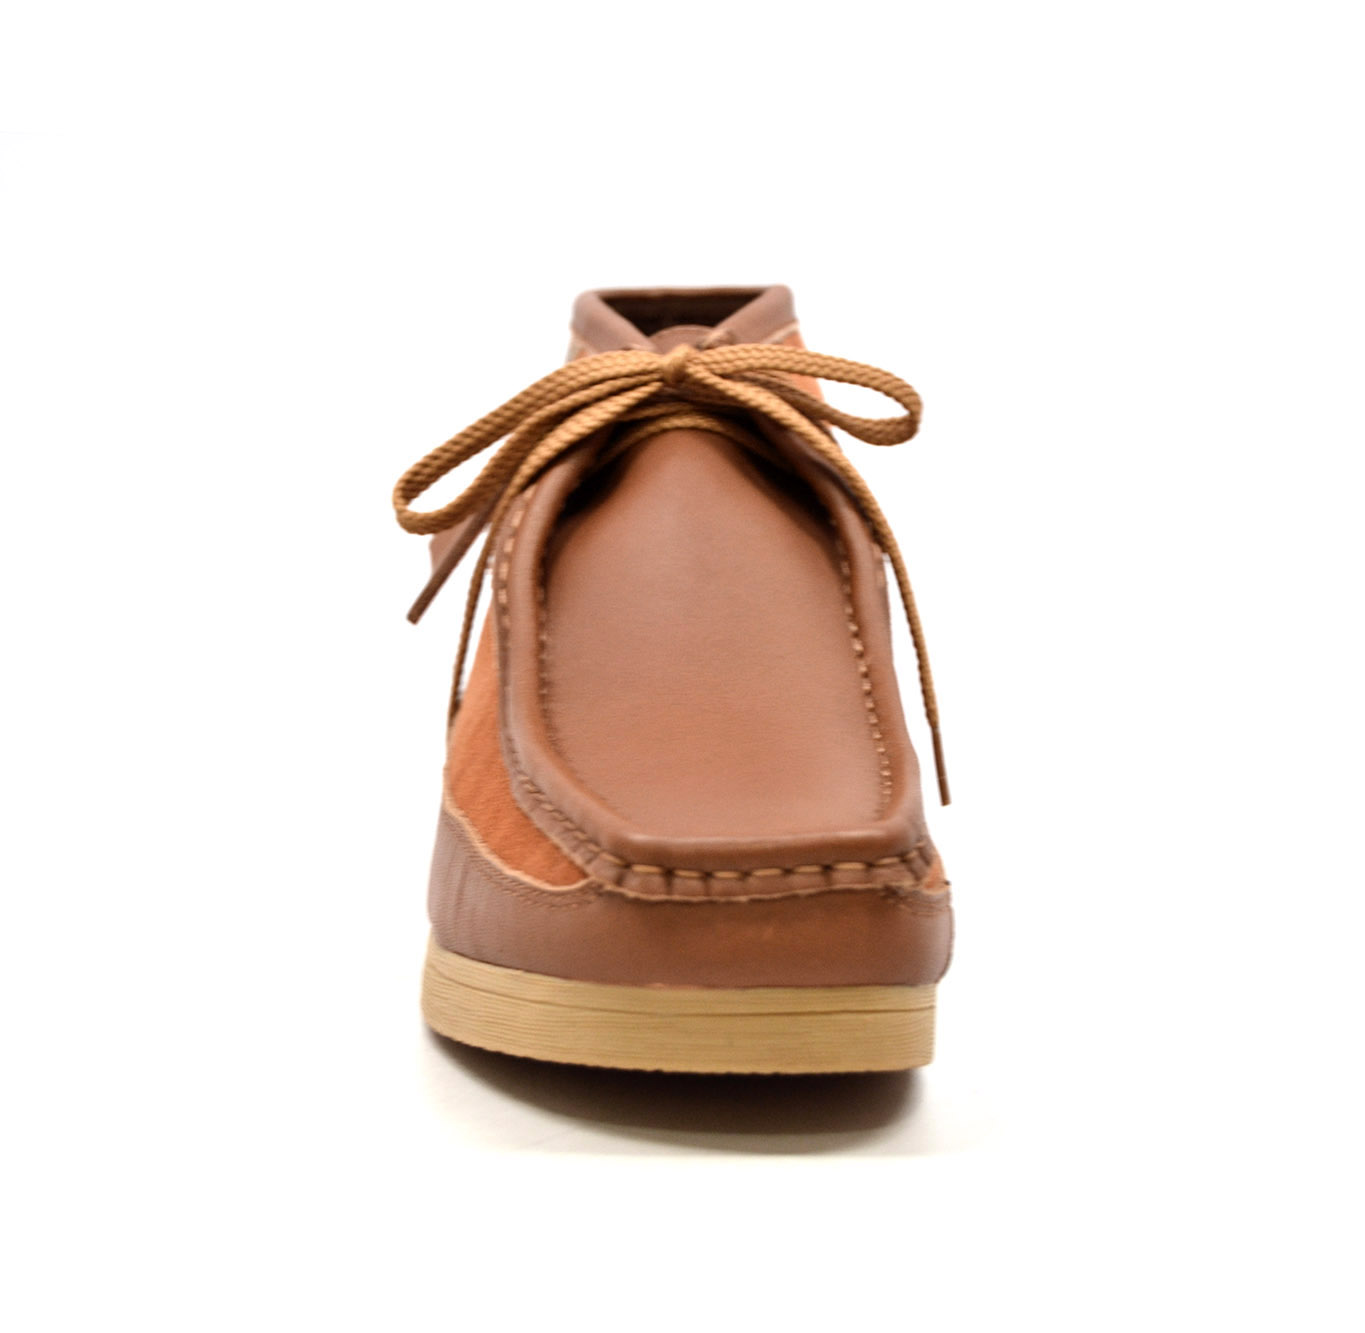 British CollectionNew Castle- Tan Leather and Suede [999-8-10] - $125. ...